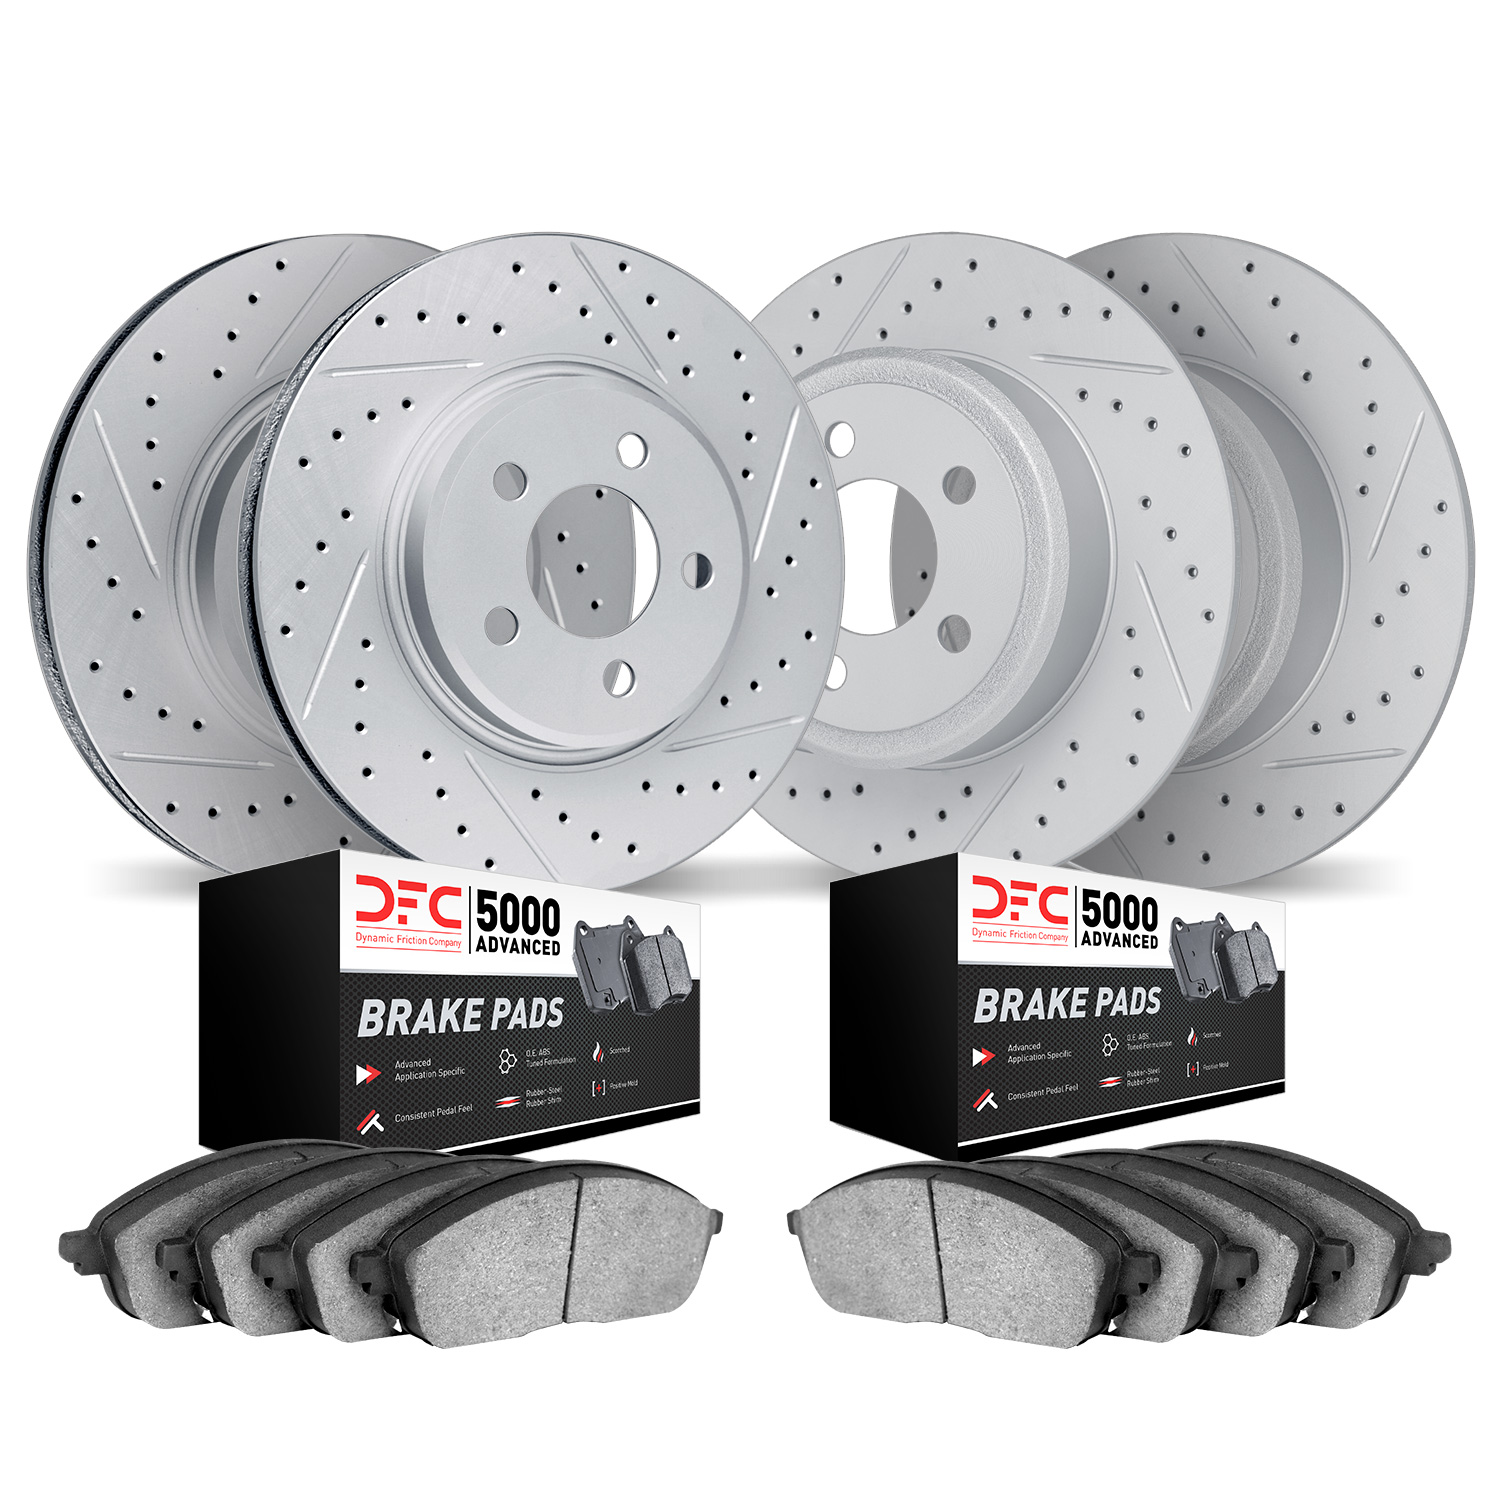 2504-54225 Geoperformance Drilled/Slotted Rotors w/5000 Advanced Brake Pads Kit, 2015-2020 Ford/Lincoln/Mercury/Mazda, Position: